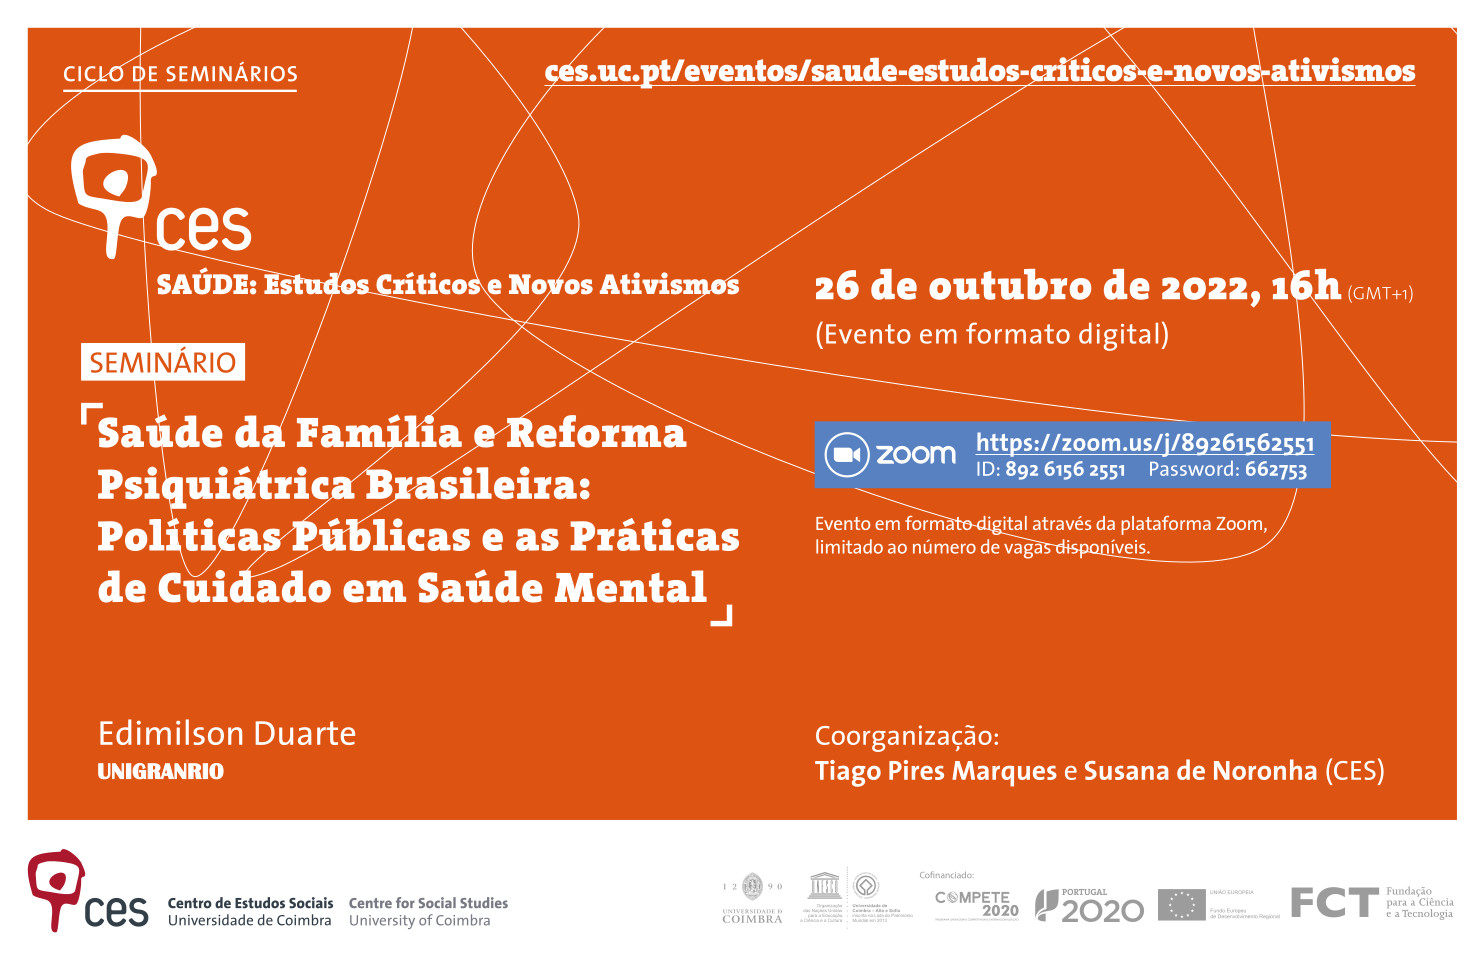 Family Health and Brazilian Psychiatric Reform: Public Policies and Mental Health Care Practices<span id="edit_40598"><script>$(function() { $('#edit_40598').load( "/myces/user/editobj.php?tipo=evento&id=40598" ); });</script></span>